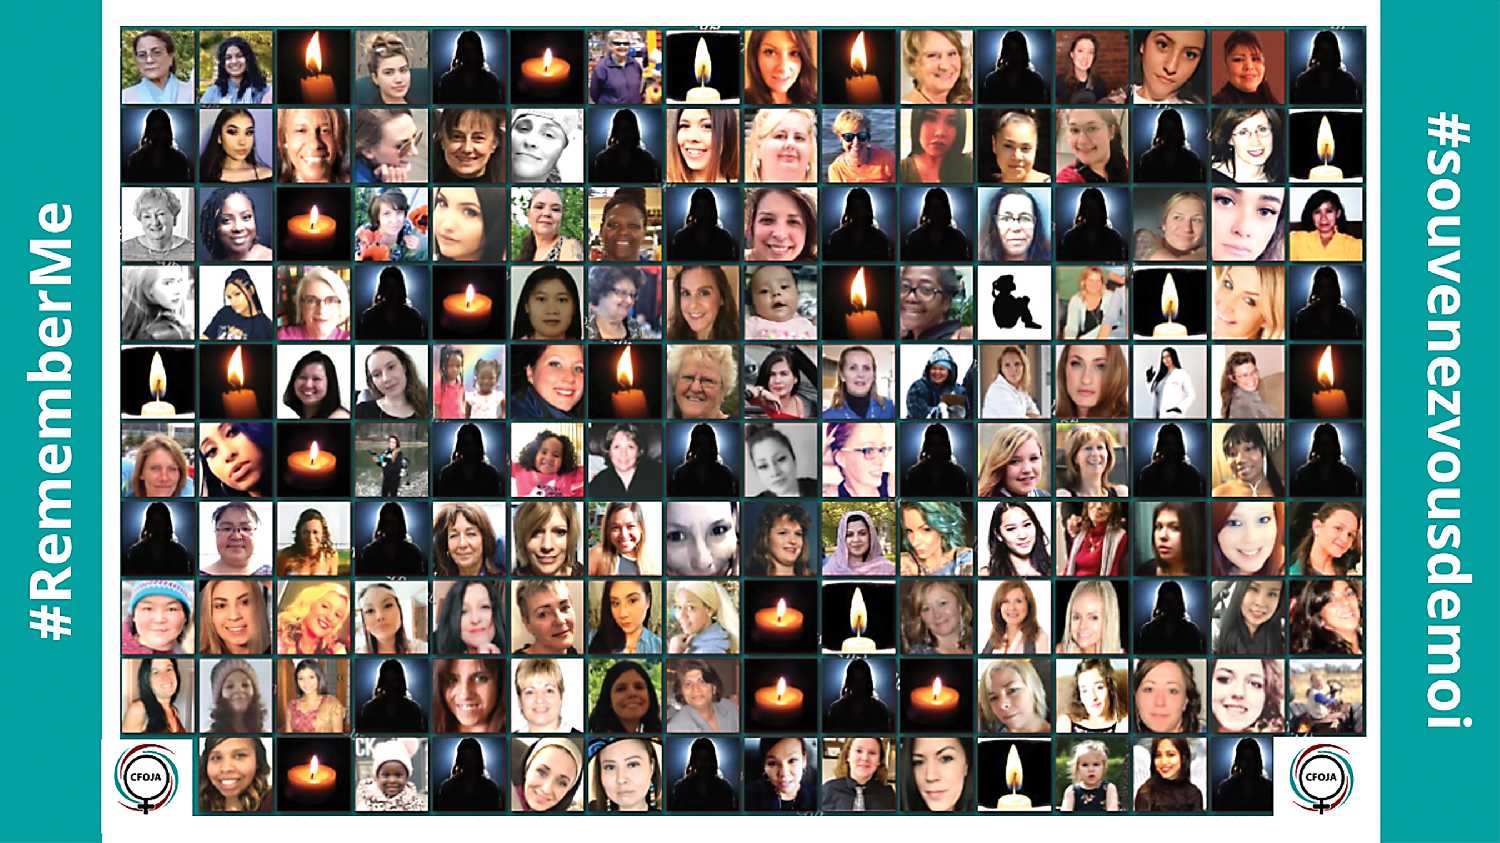 A collage of the 159 women and girls killed by violence in Canada, since January 1 to Dec. 6 of this year. The full report will be released early 2022 by Canadian Femicide Observatory for Justice and Accountability.